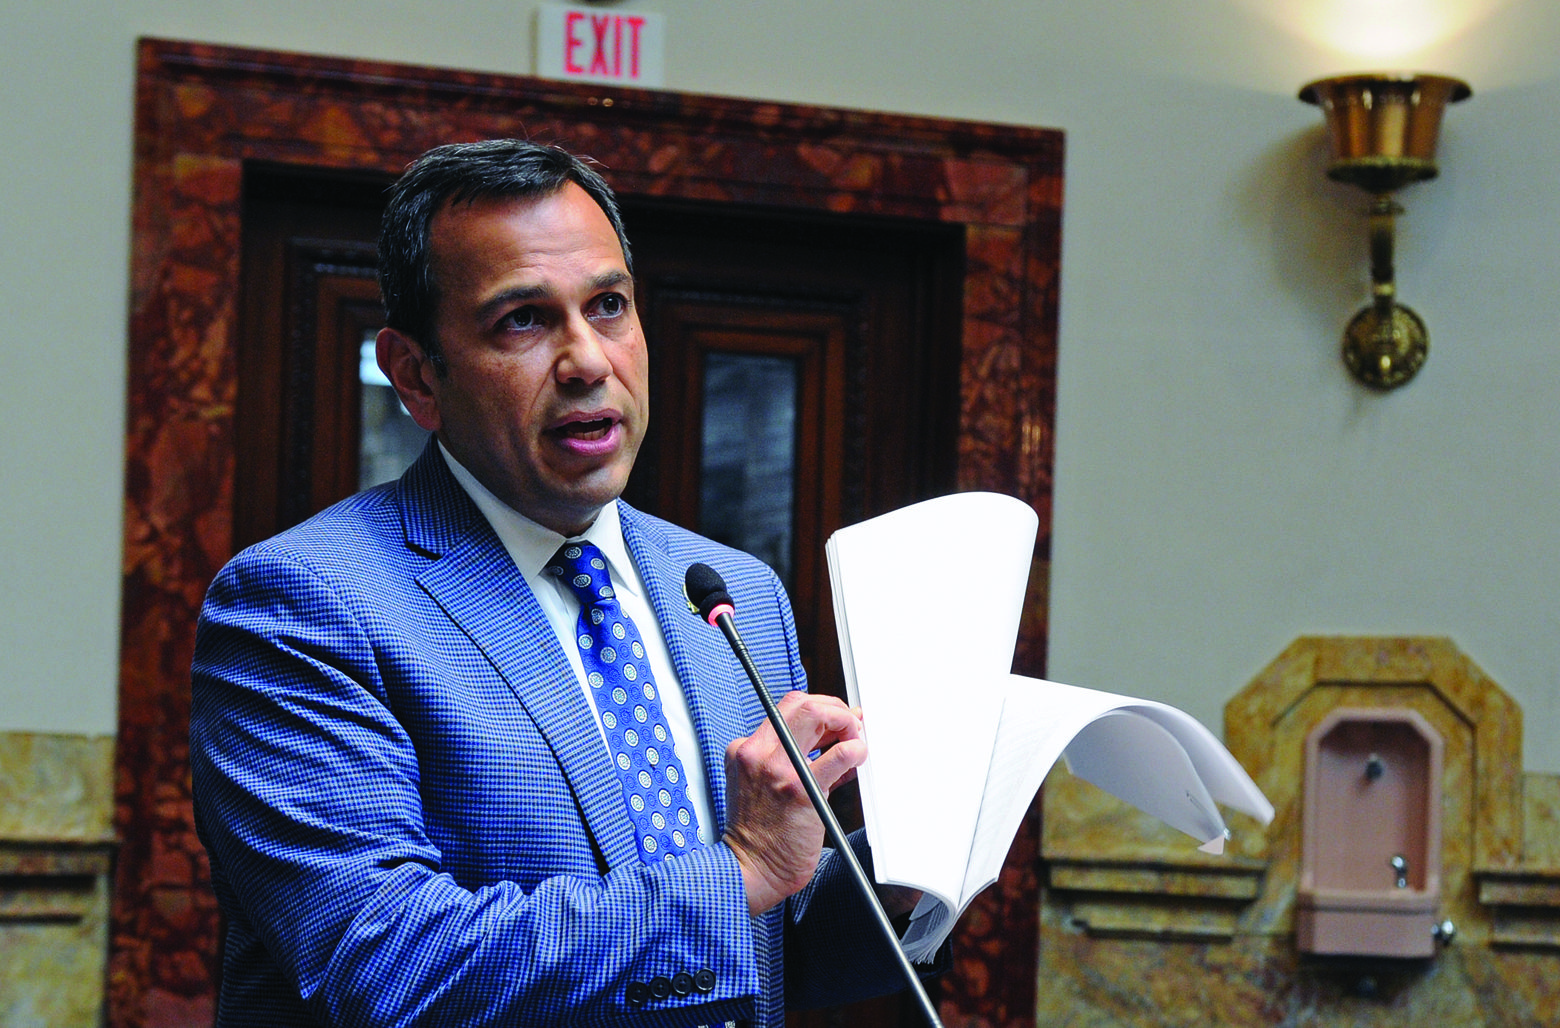 State Sen. Ralph Alvarado, R-Winchester, explains a vote in the Senate during last year’s special session in September. Photo: Legislative Research Commission